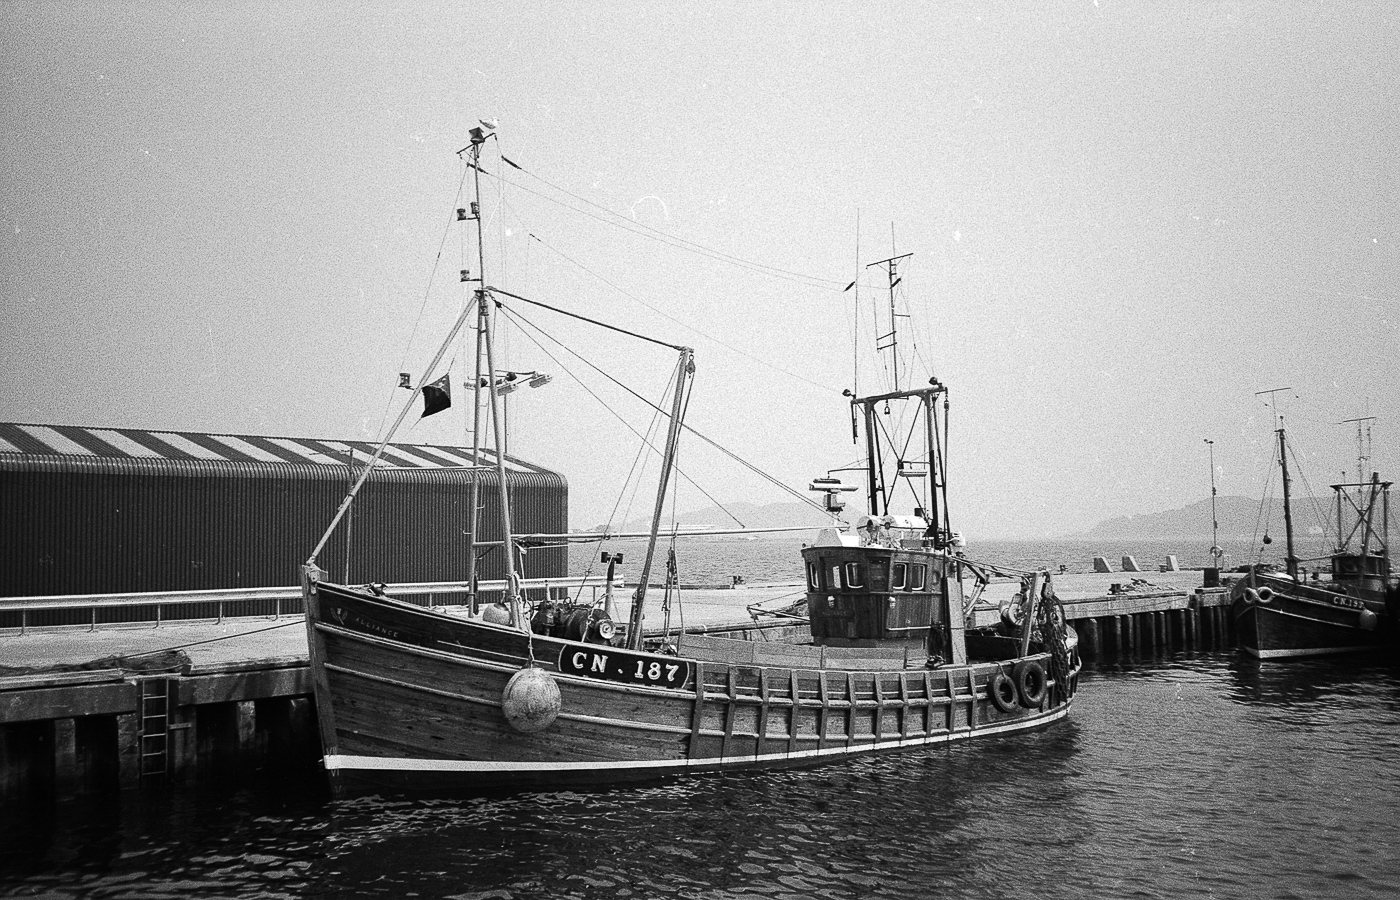 'Alliance', CN187, in harbour, Campbeltown, 1983. Although she was a dual purpose ringnetter and trawler, here she is rigged for pelagic pair trawling.